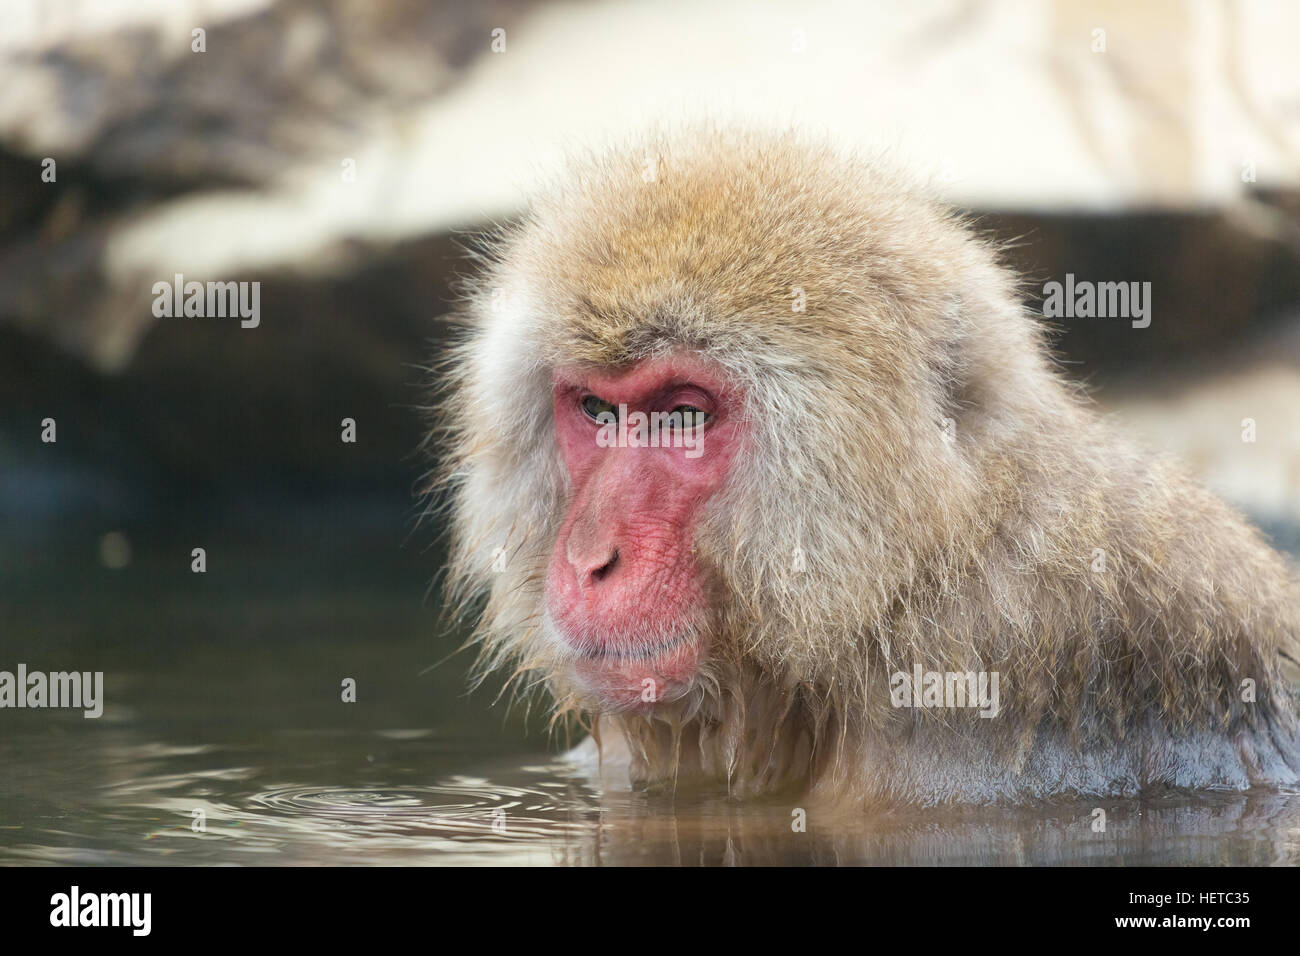 Closeup of wild monkey in the hot springs in winter. Stock Photo